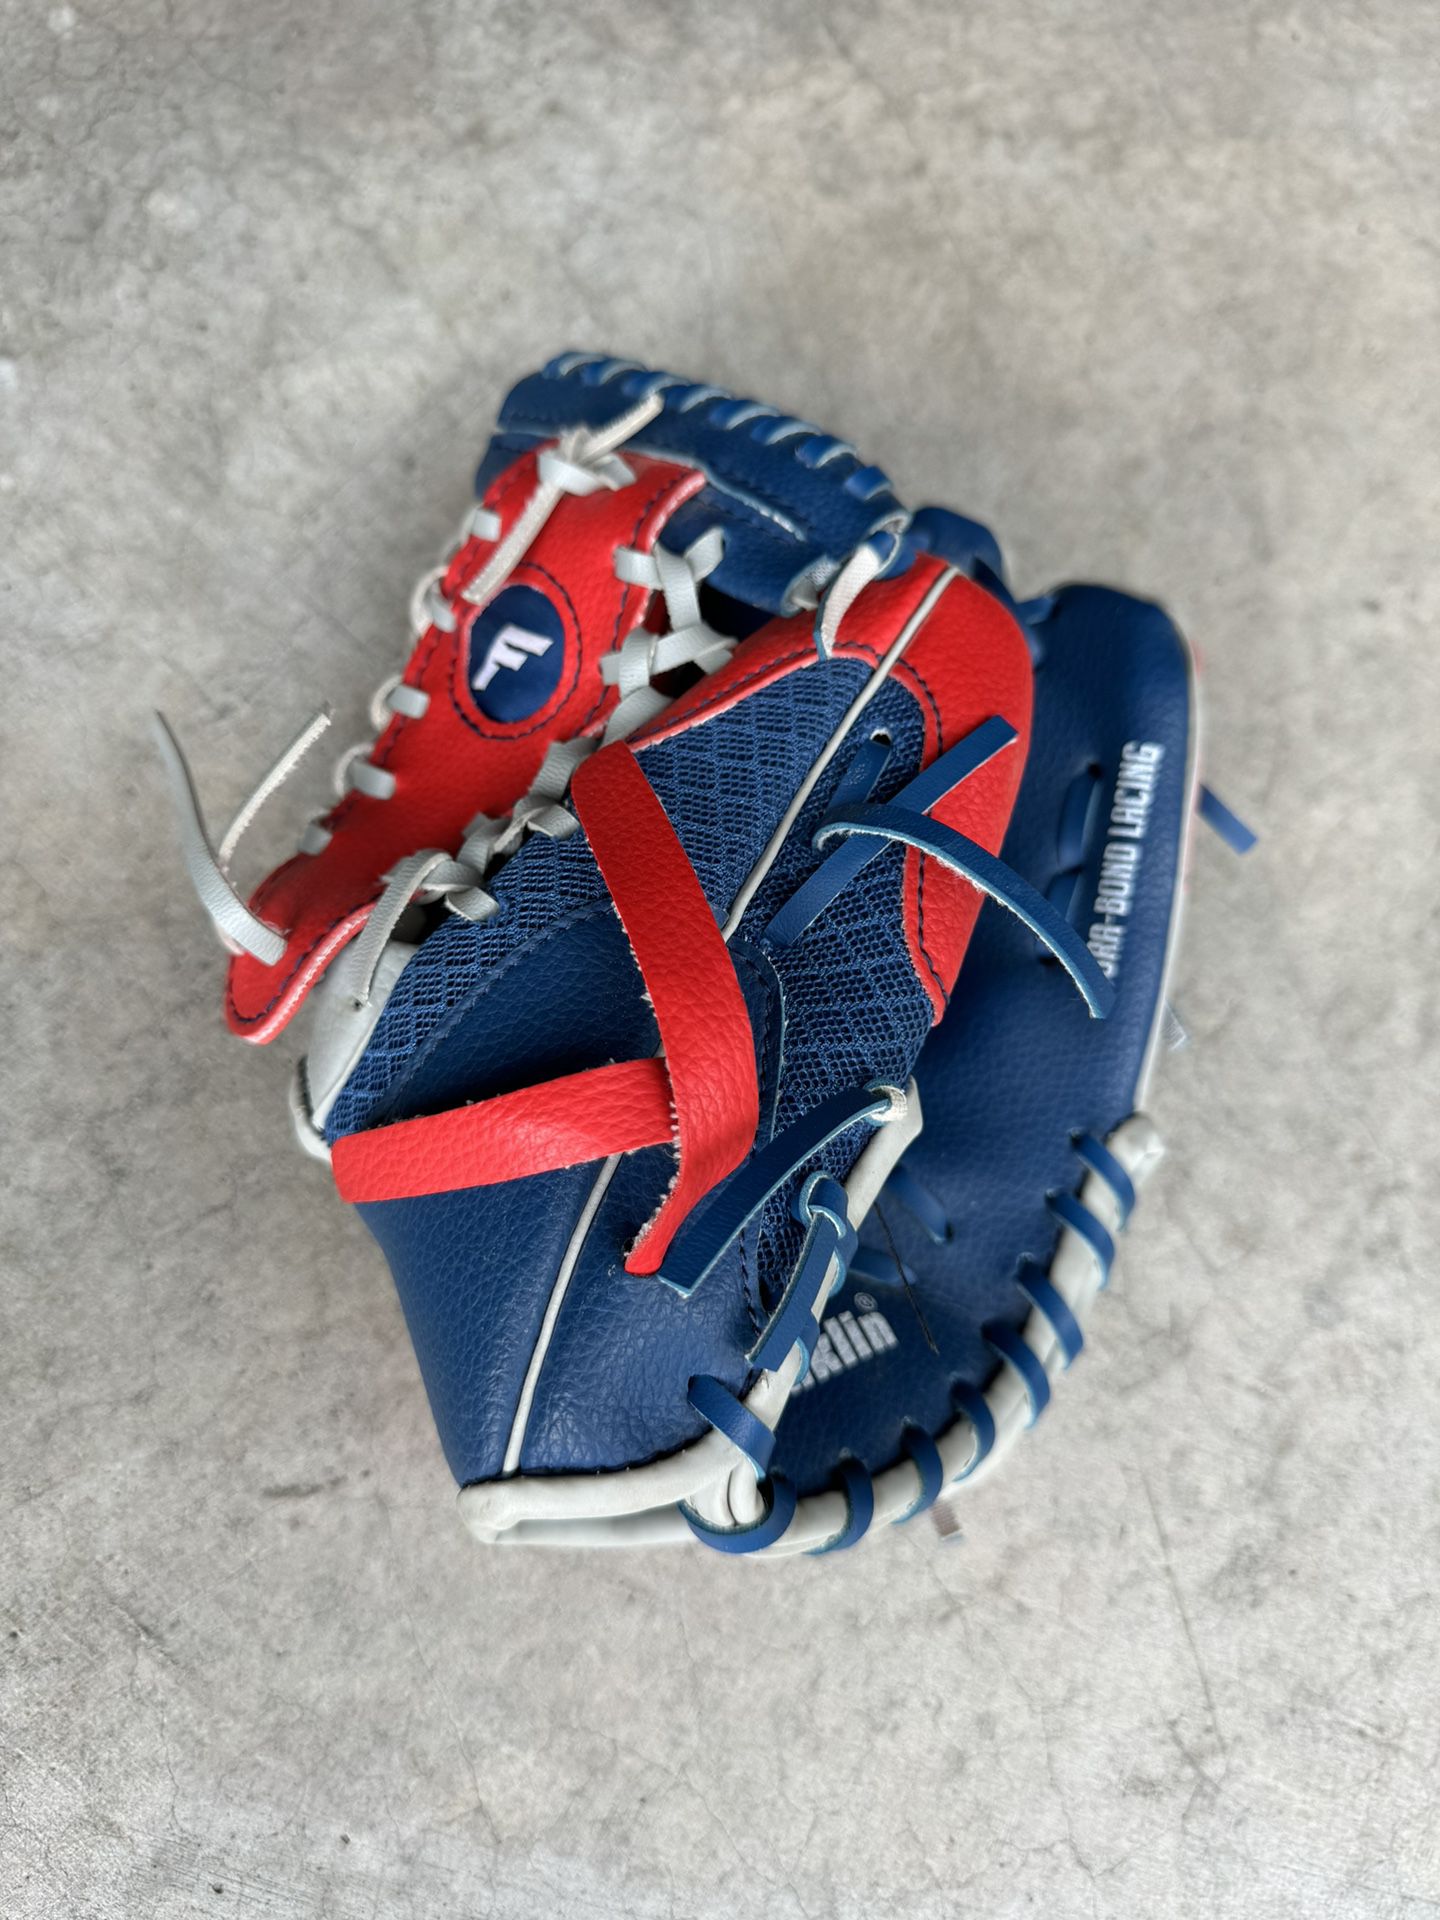 Franklin Youth Glove 9.5